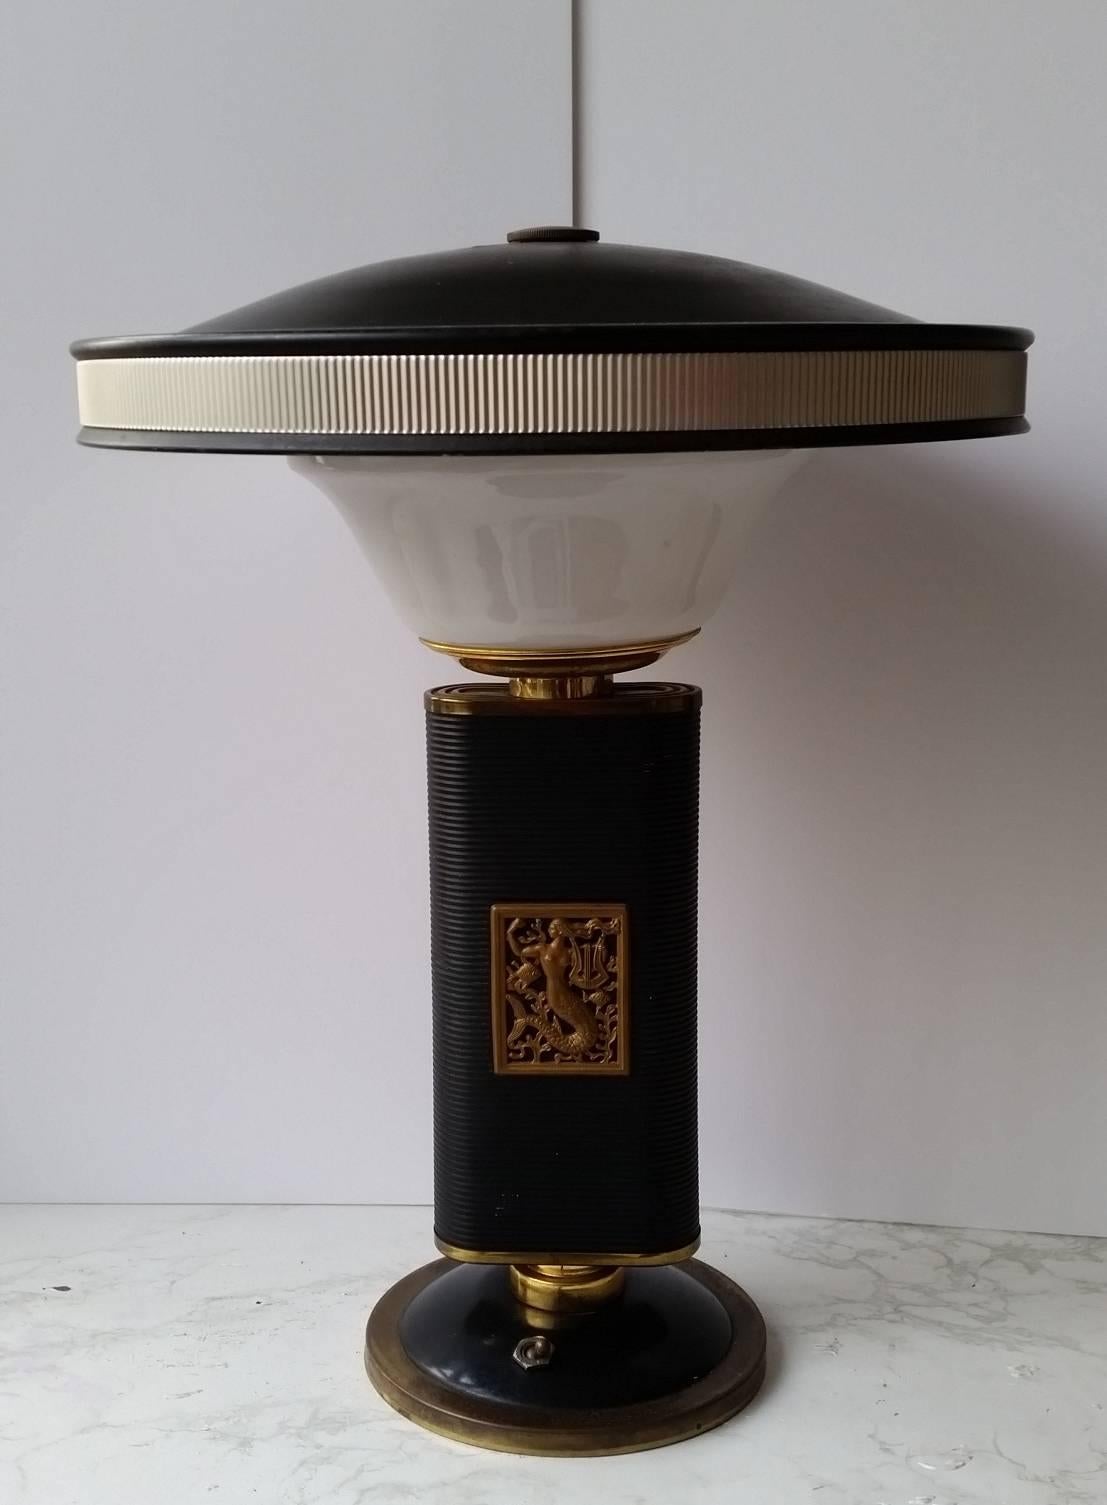 Magnificent Eileen gray table lamp - in metal, glass and celluloid decorated with a cartouche featuring a siren playing the lyre.
Model created for the house Jumo in the years 1930-1940
Measures: Height 48 cm and diameter 39 cm
In good condition